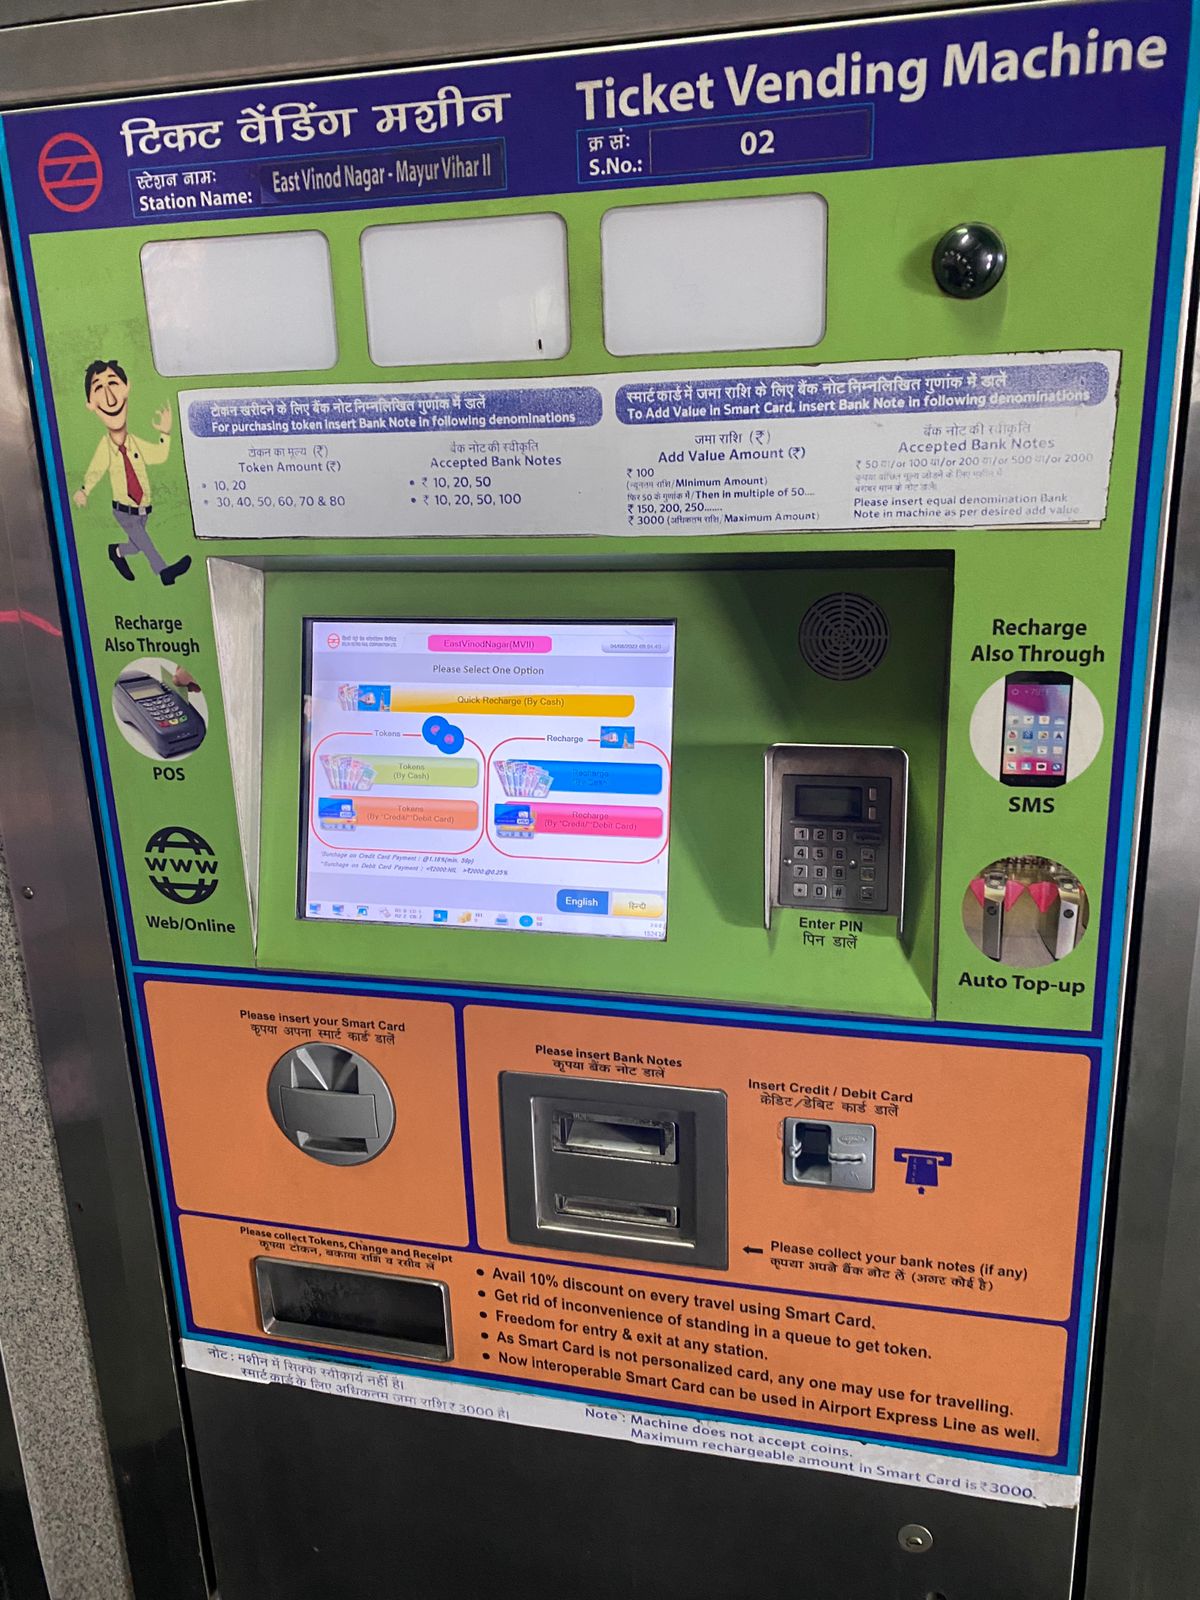 Ticket Vending Machine - Common types of vending machines at station